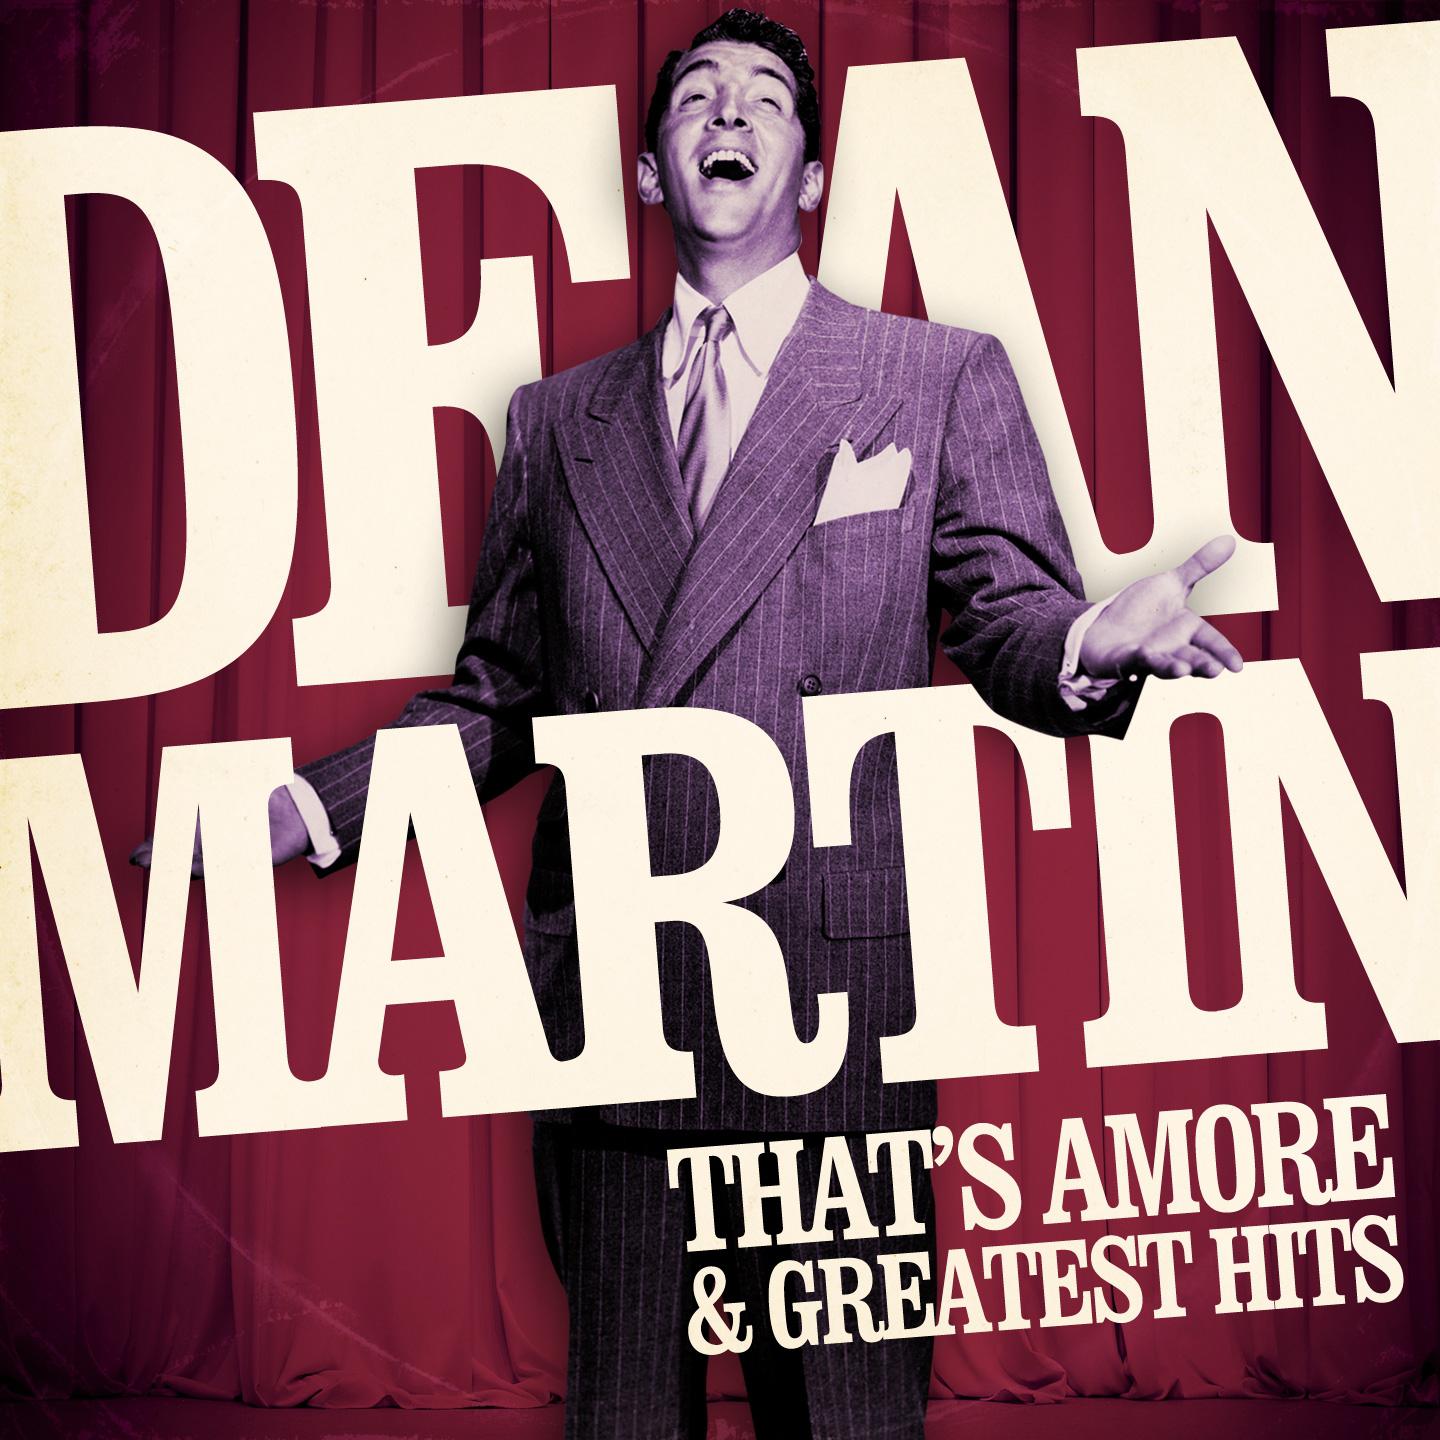 That's Amore & Greatest Hits (Remastered)